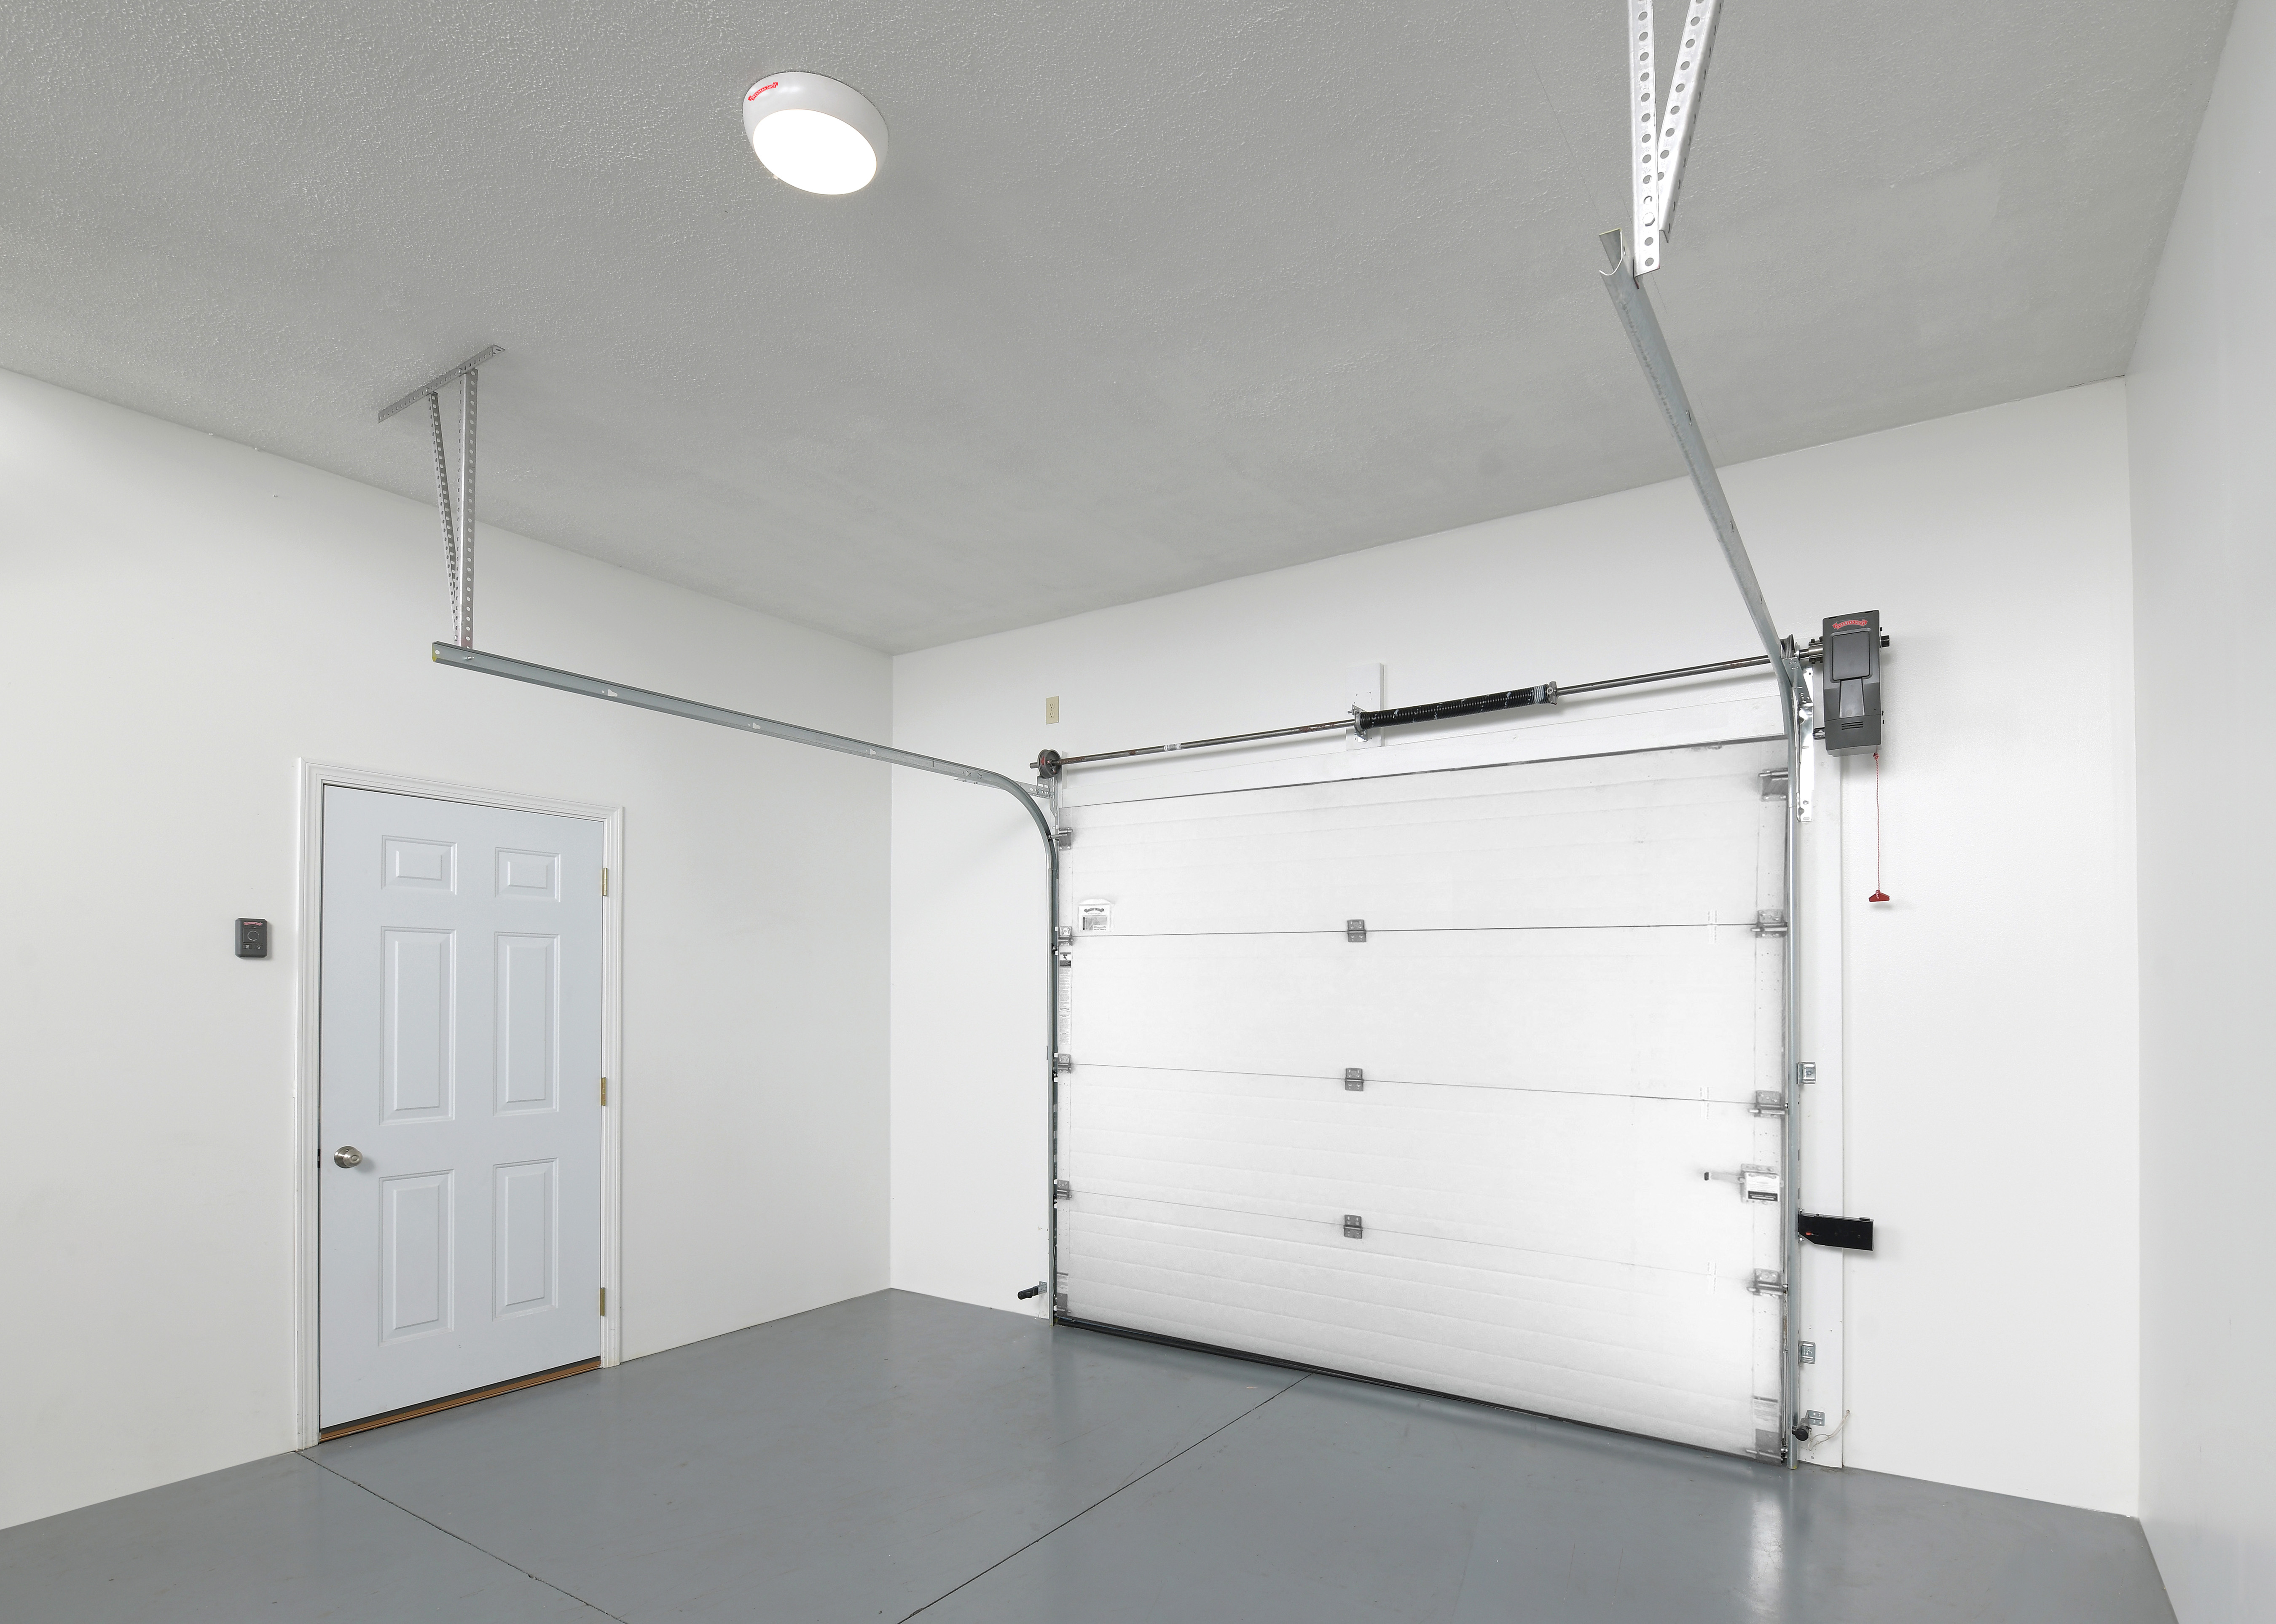 Overhead Door Introduces Its First Wall-Mount Garage Openers ... - OverheaD Door Infinity 2000 Wall Mount Garage Openers Application